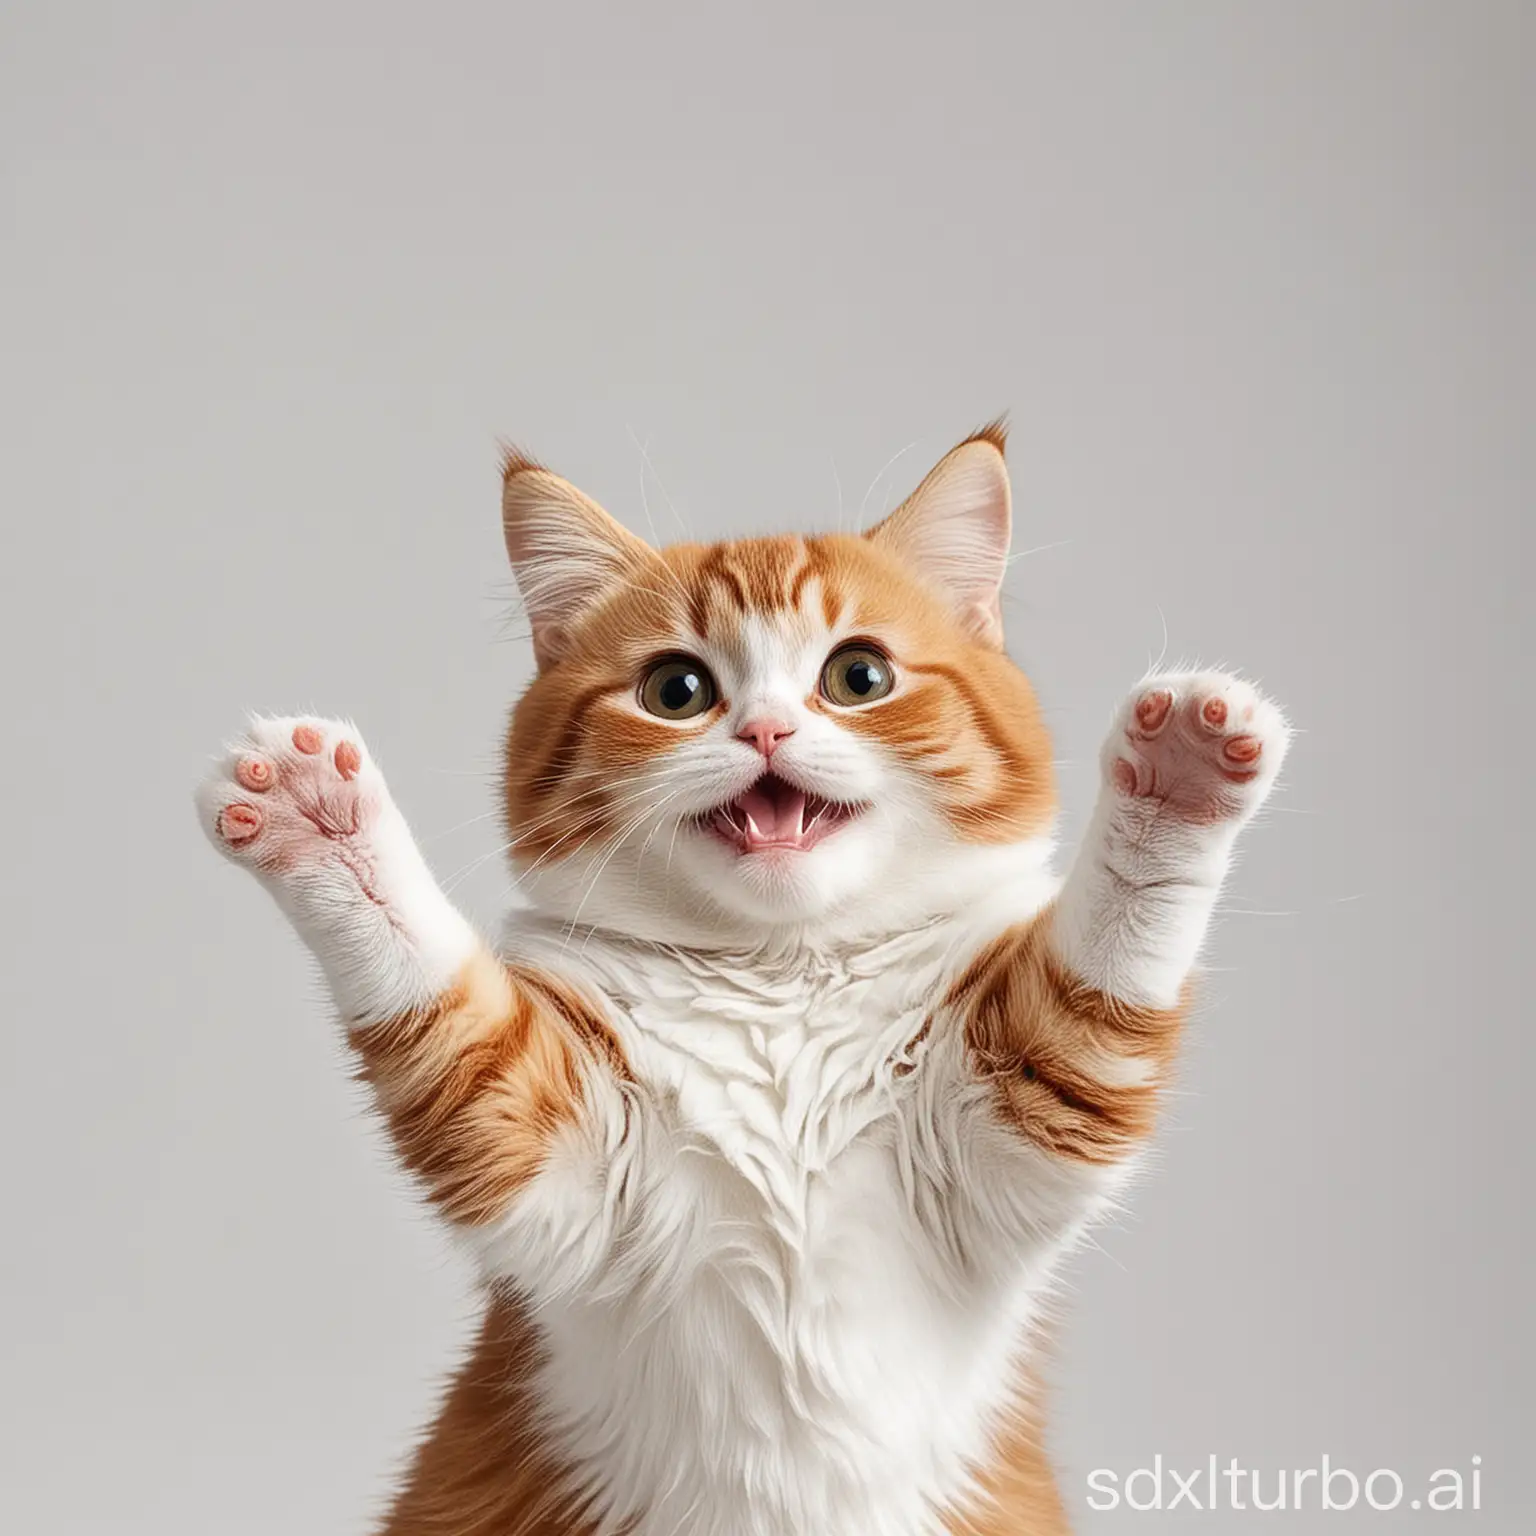 Cute cat waving and smiling with white background